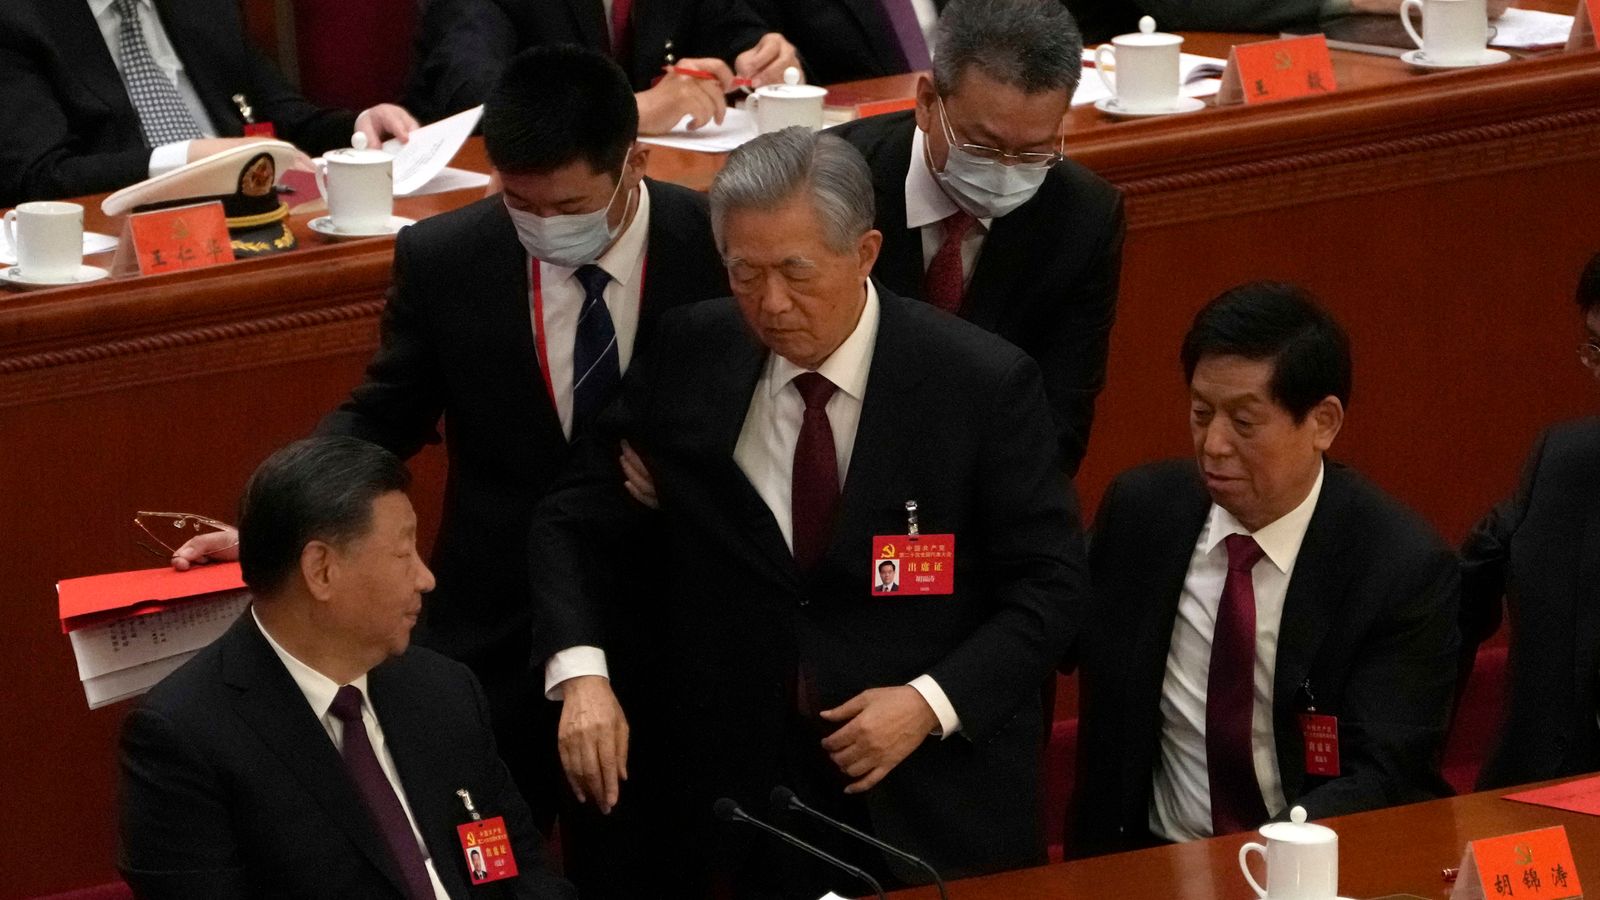 China's former president Hu Jintao unexpectedly escorted out of party congress